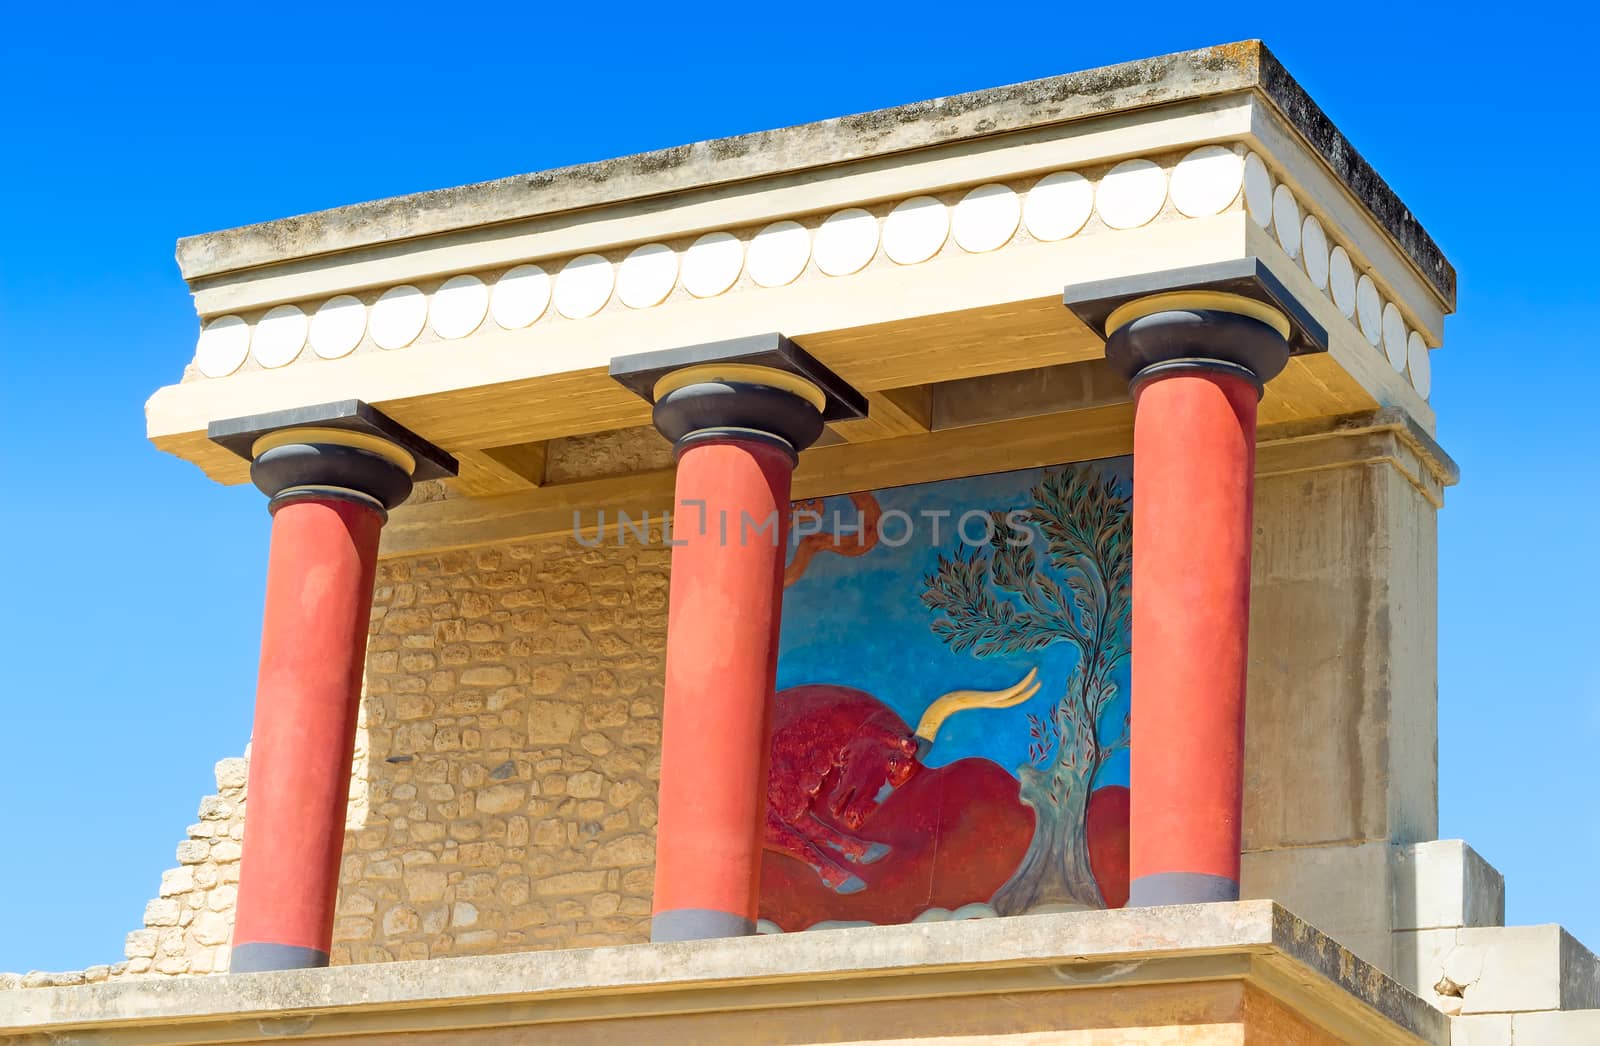 Legendary architectural monument of the Minoan civilization - the Palace of Knossos, Crete, Greece.